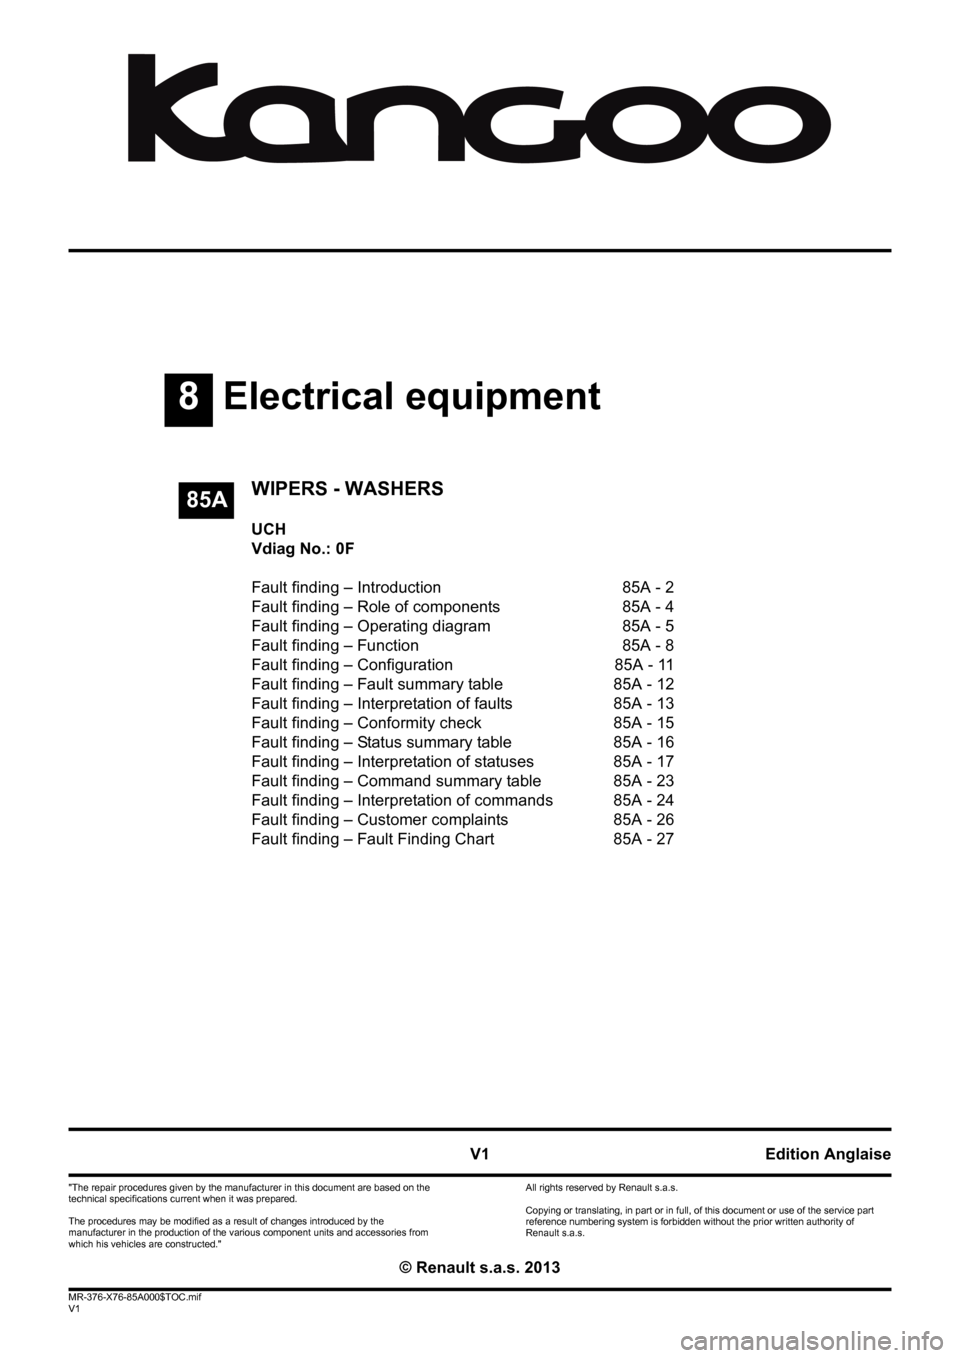 RENAULT KANGOO 2013 X61 / 2.G Wipers And Washers Workshop Manual 8Electrical equipment
V1 MR-376-X76-85A000$TOC.mif
V1
85A
"The repair procedures given by the manufacturer in this document are based on the 
technical specifications current when it was prepared.
The